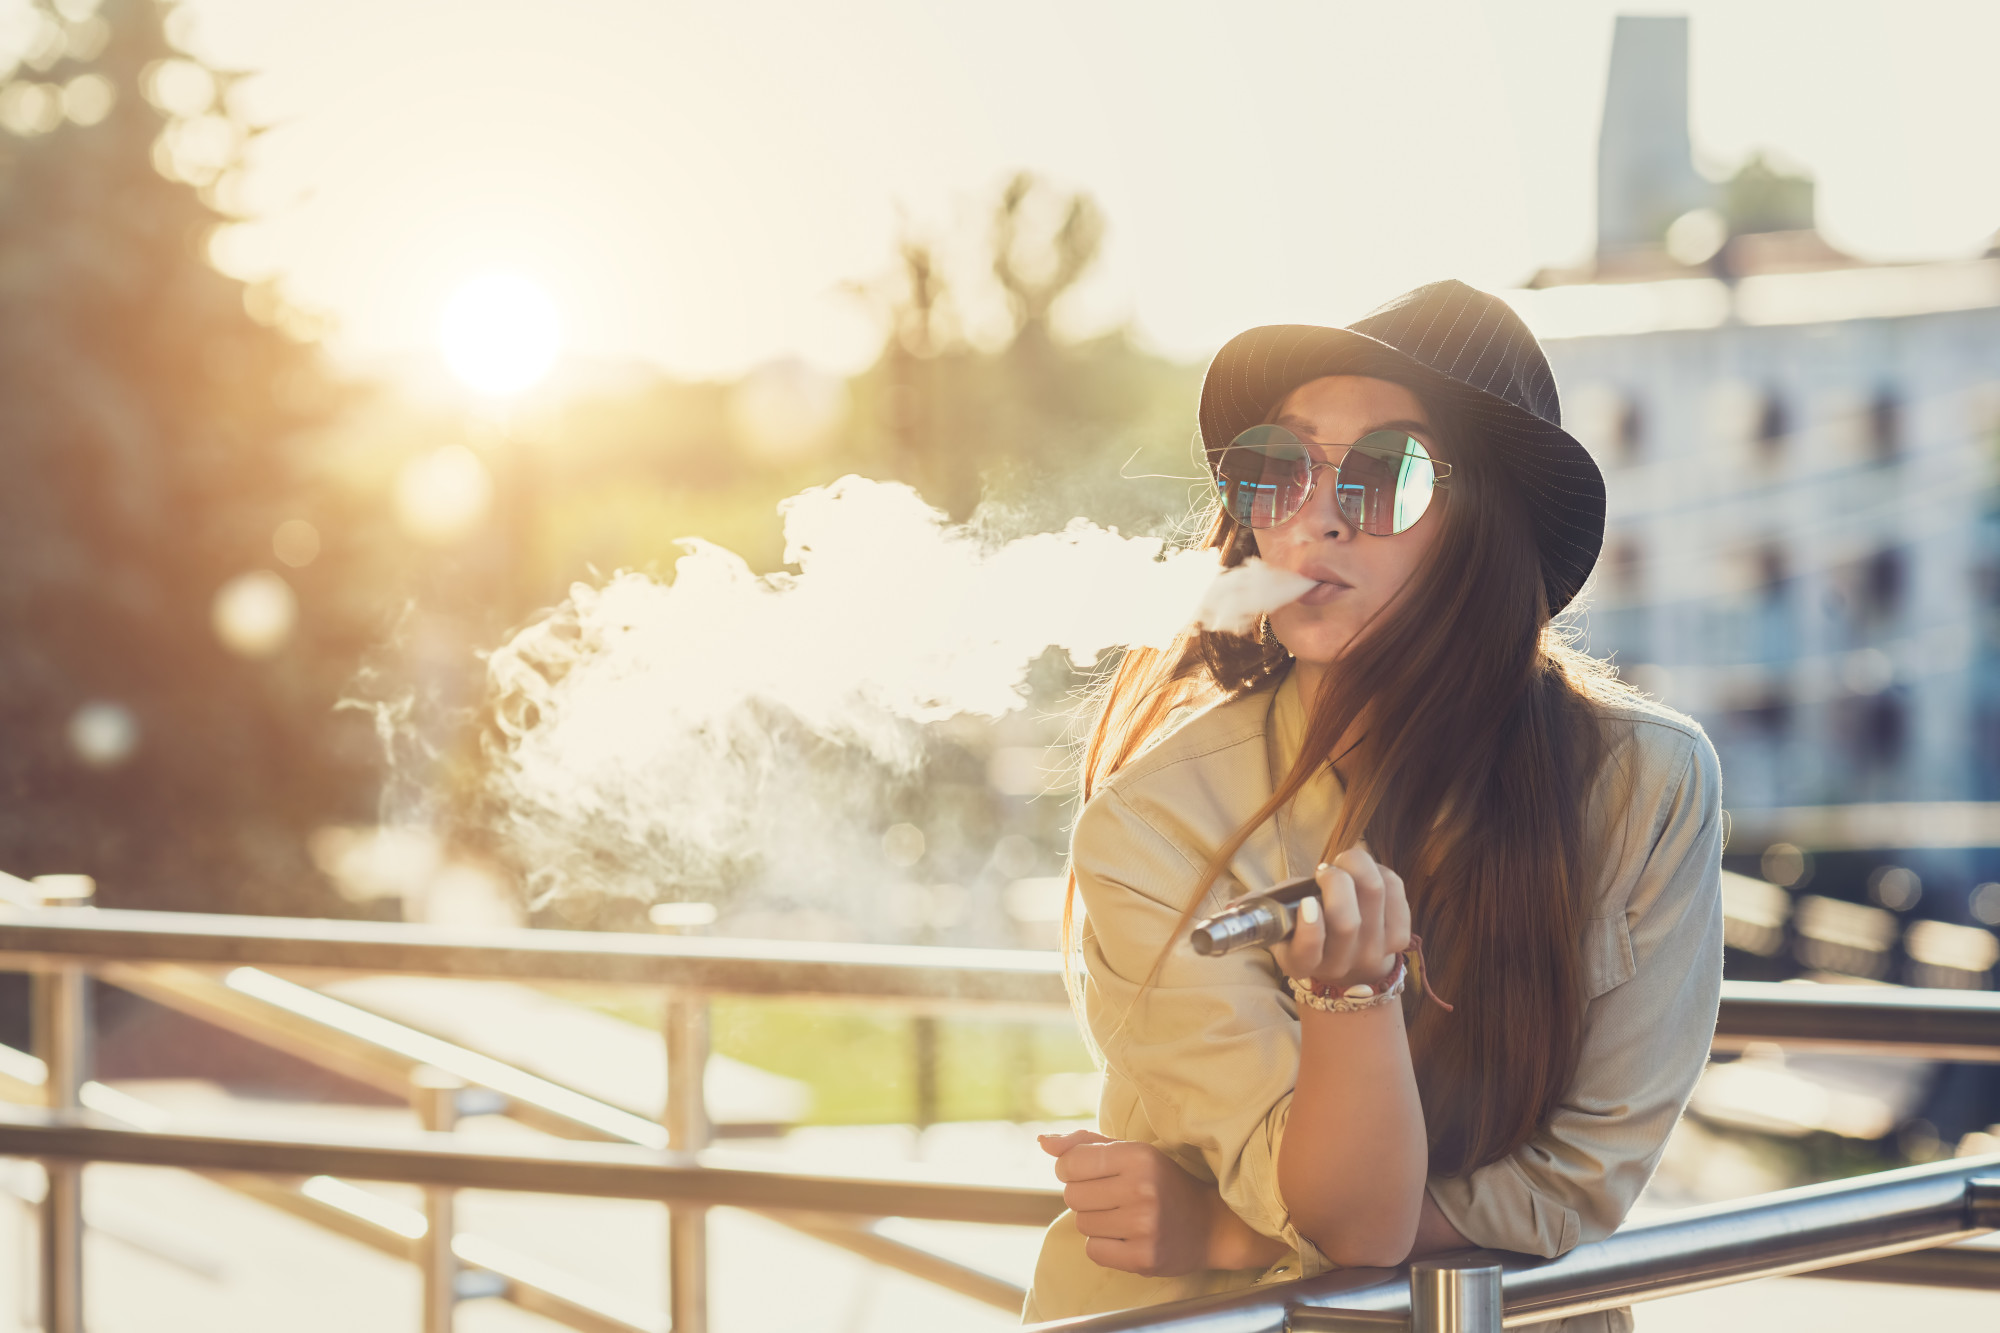 pros and cons of vaping essay